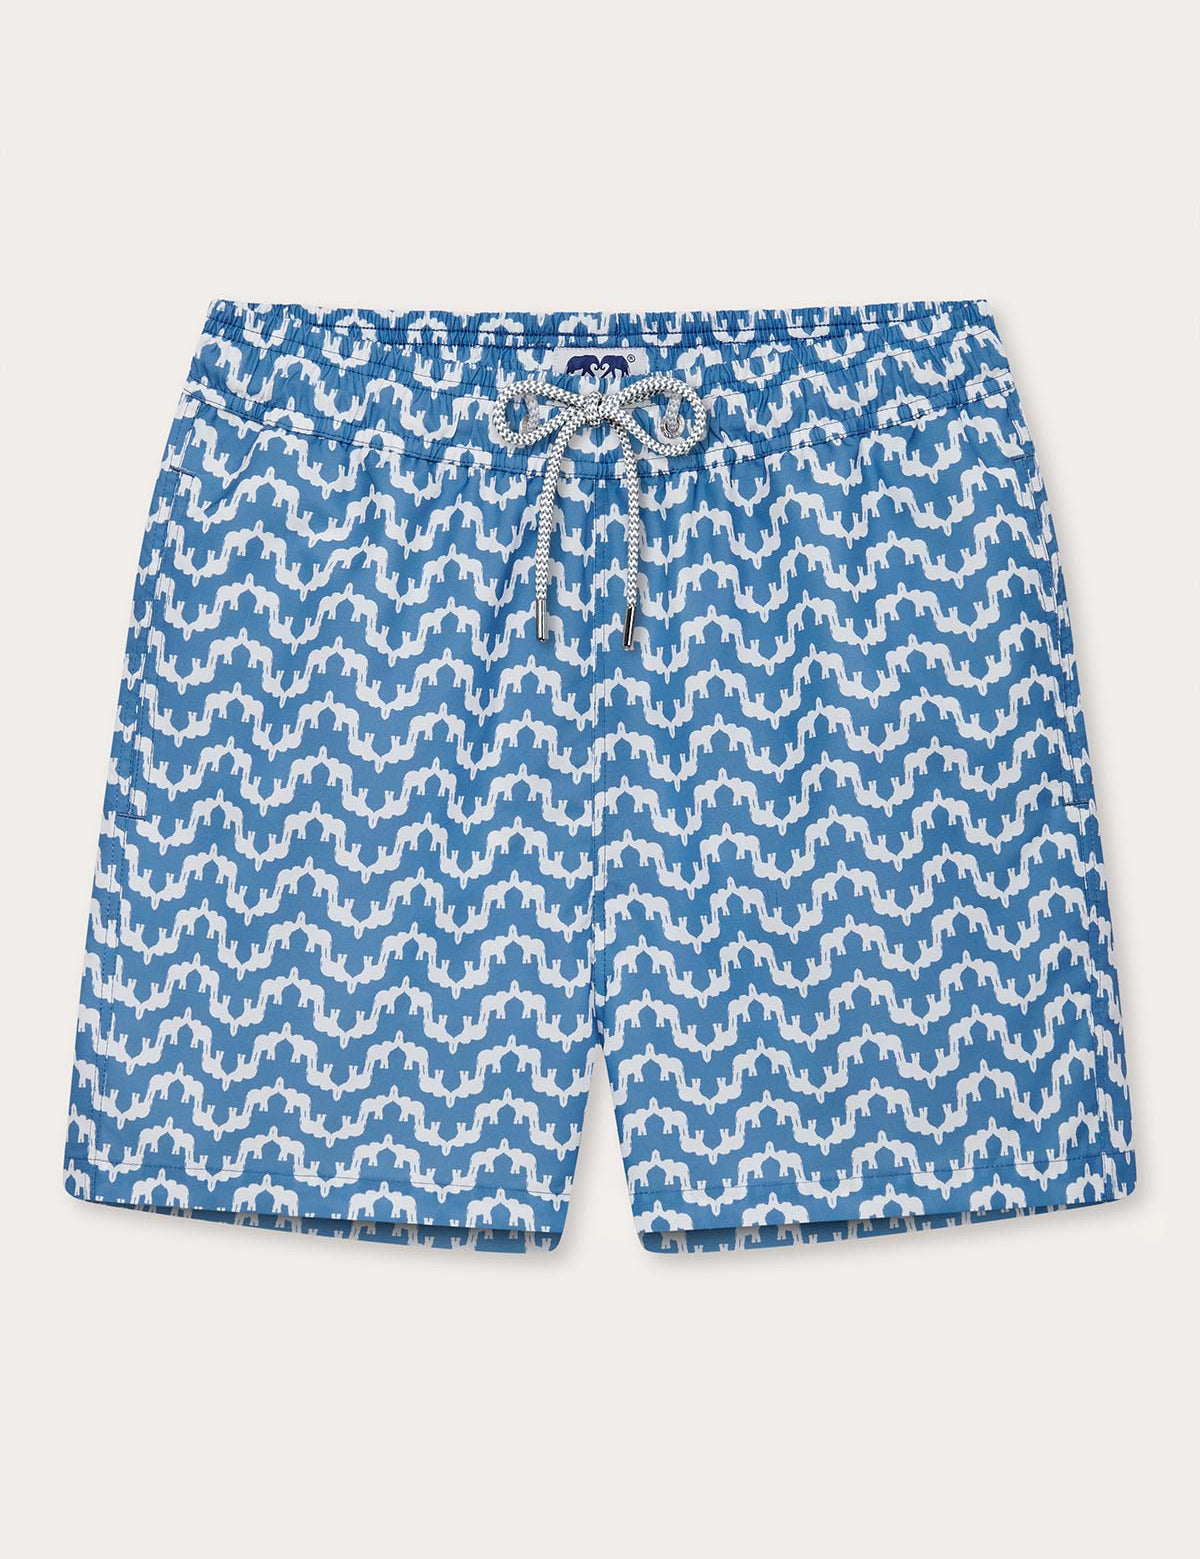 Elephant Palace Blue Staniel mens swim shorts front. This design features white elephants raising their trunks to create a pattern that resembles Indian palaces on a blue background.